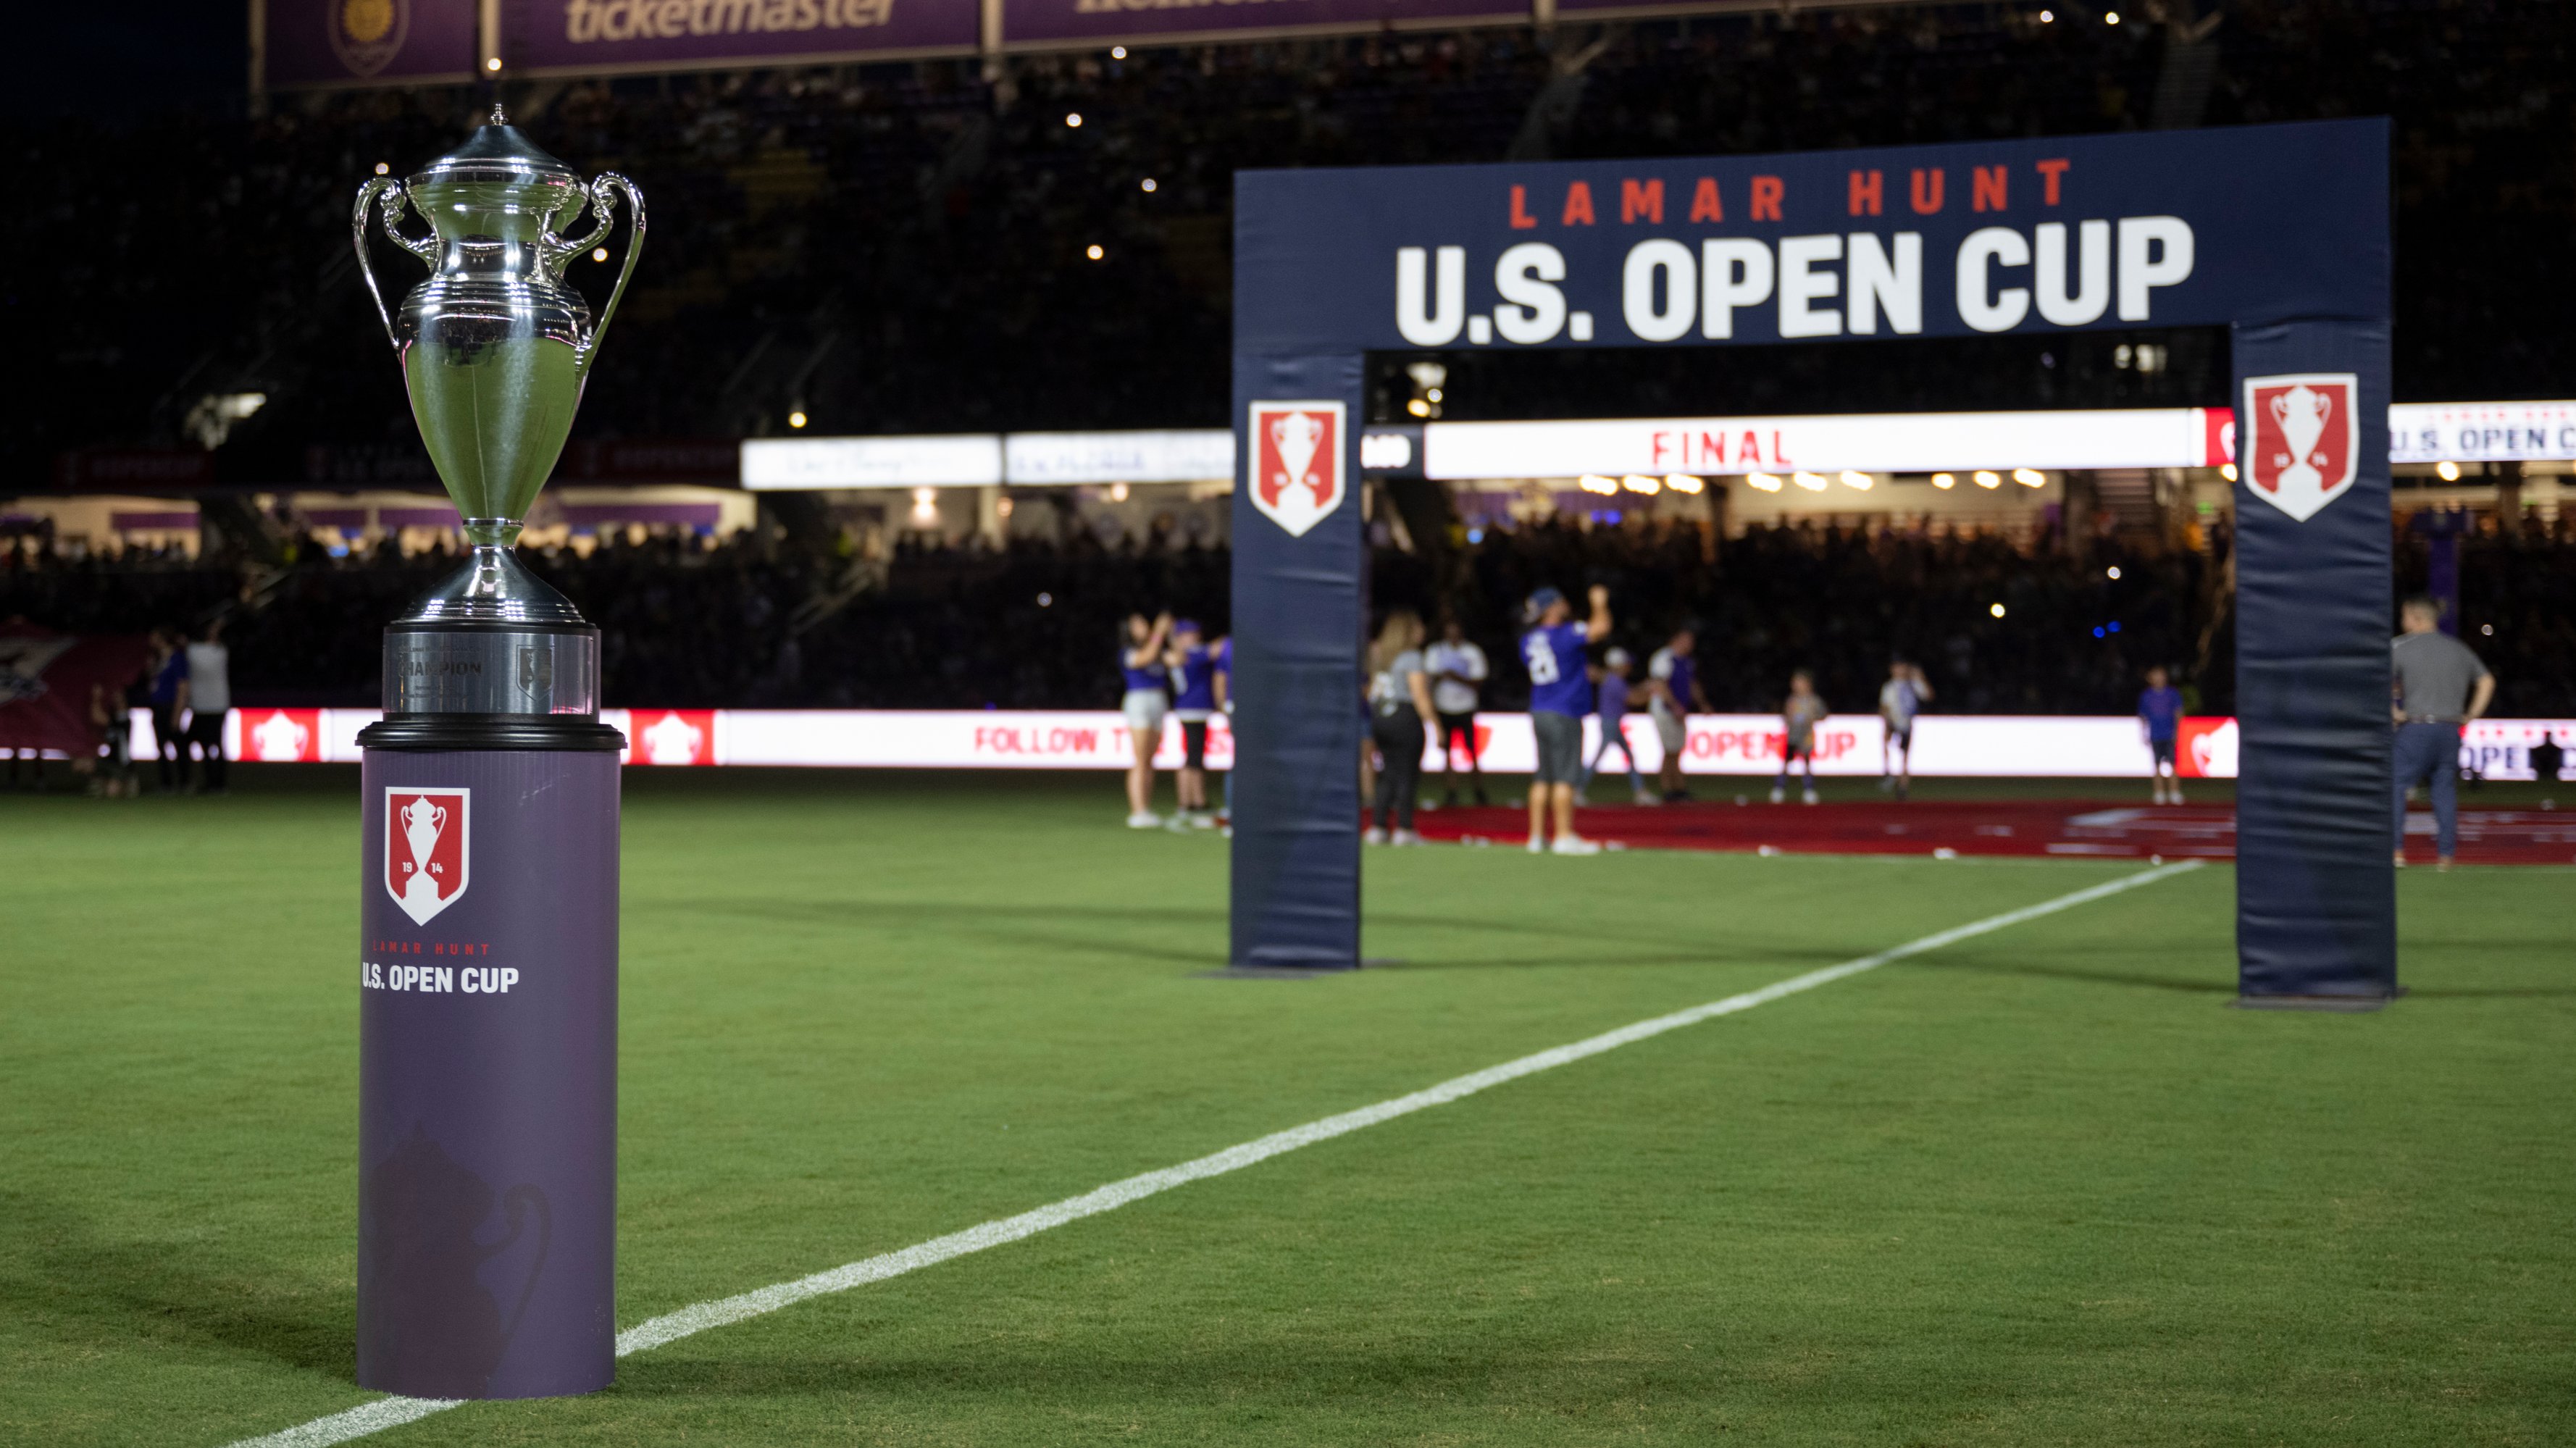 Lamar Hunt US Open Cup What to know about the countrys oldest soccer tournament pic pic